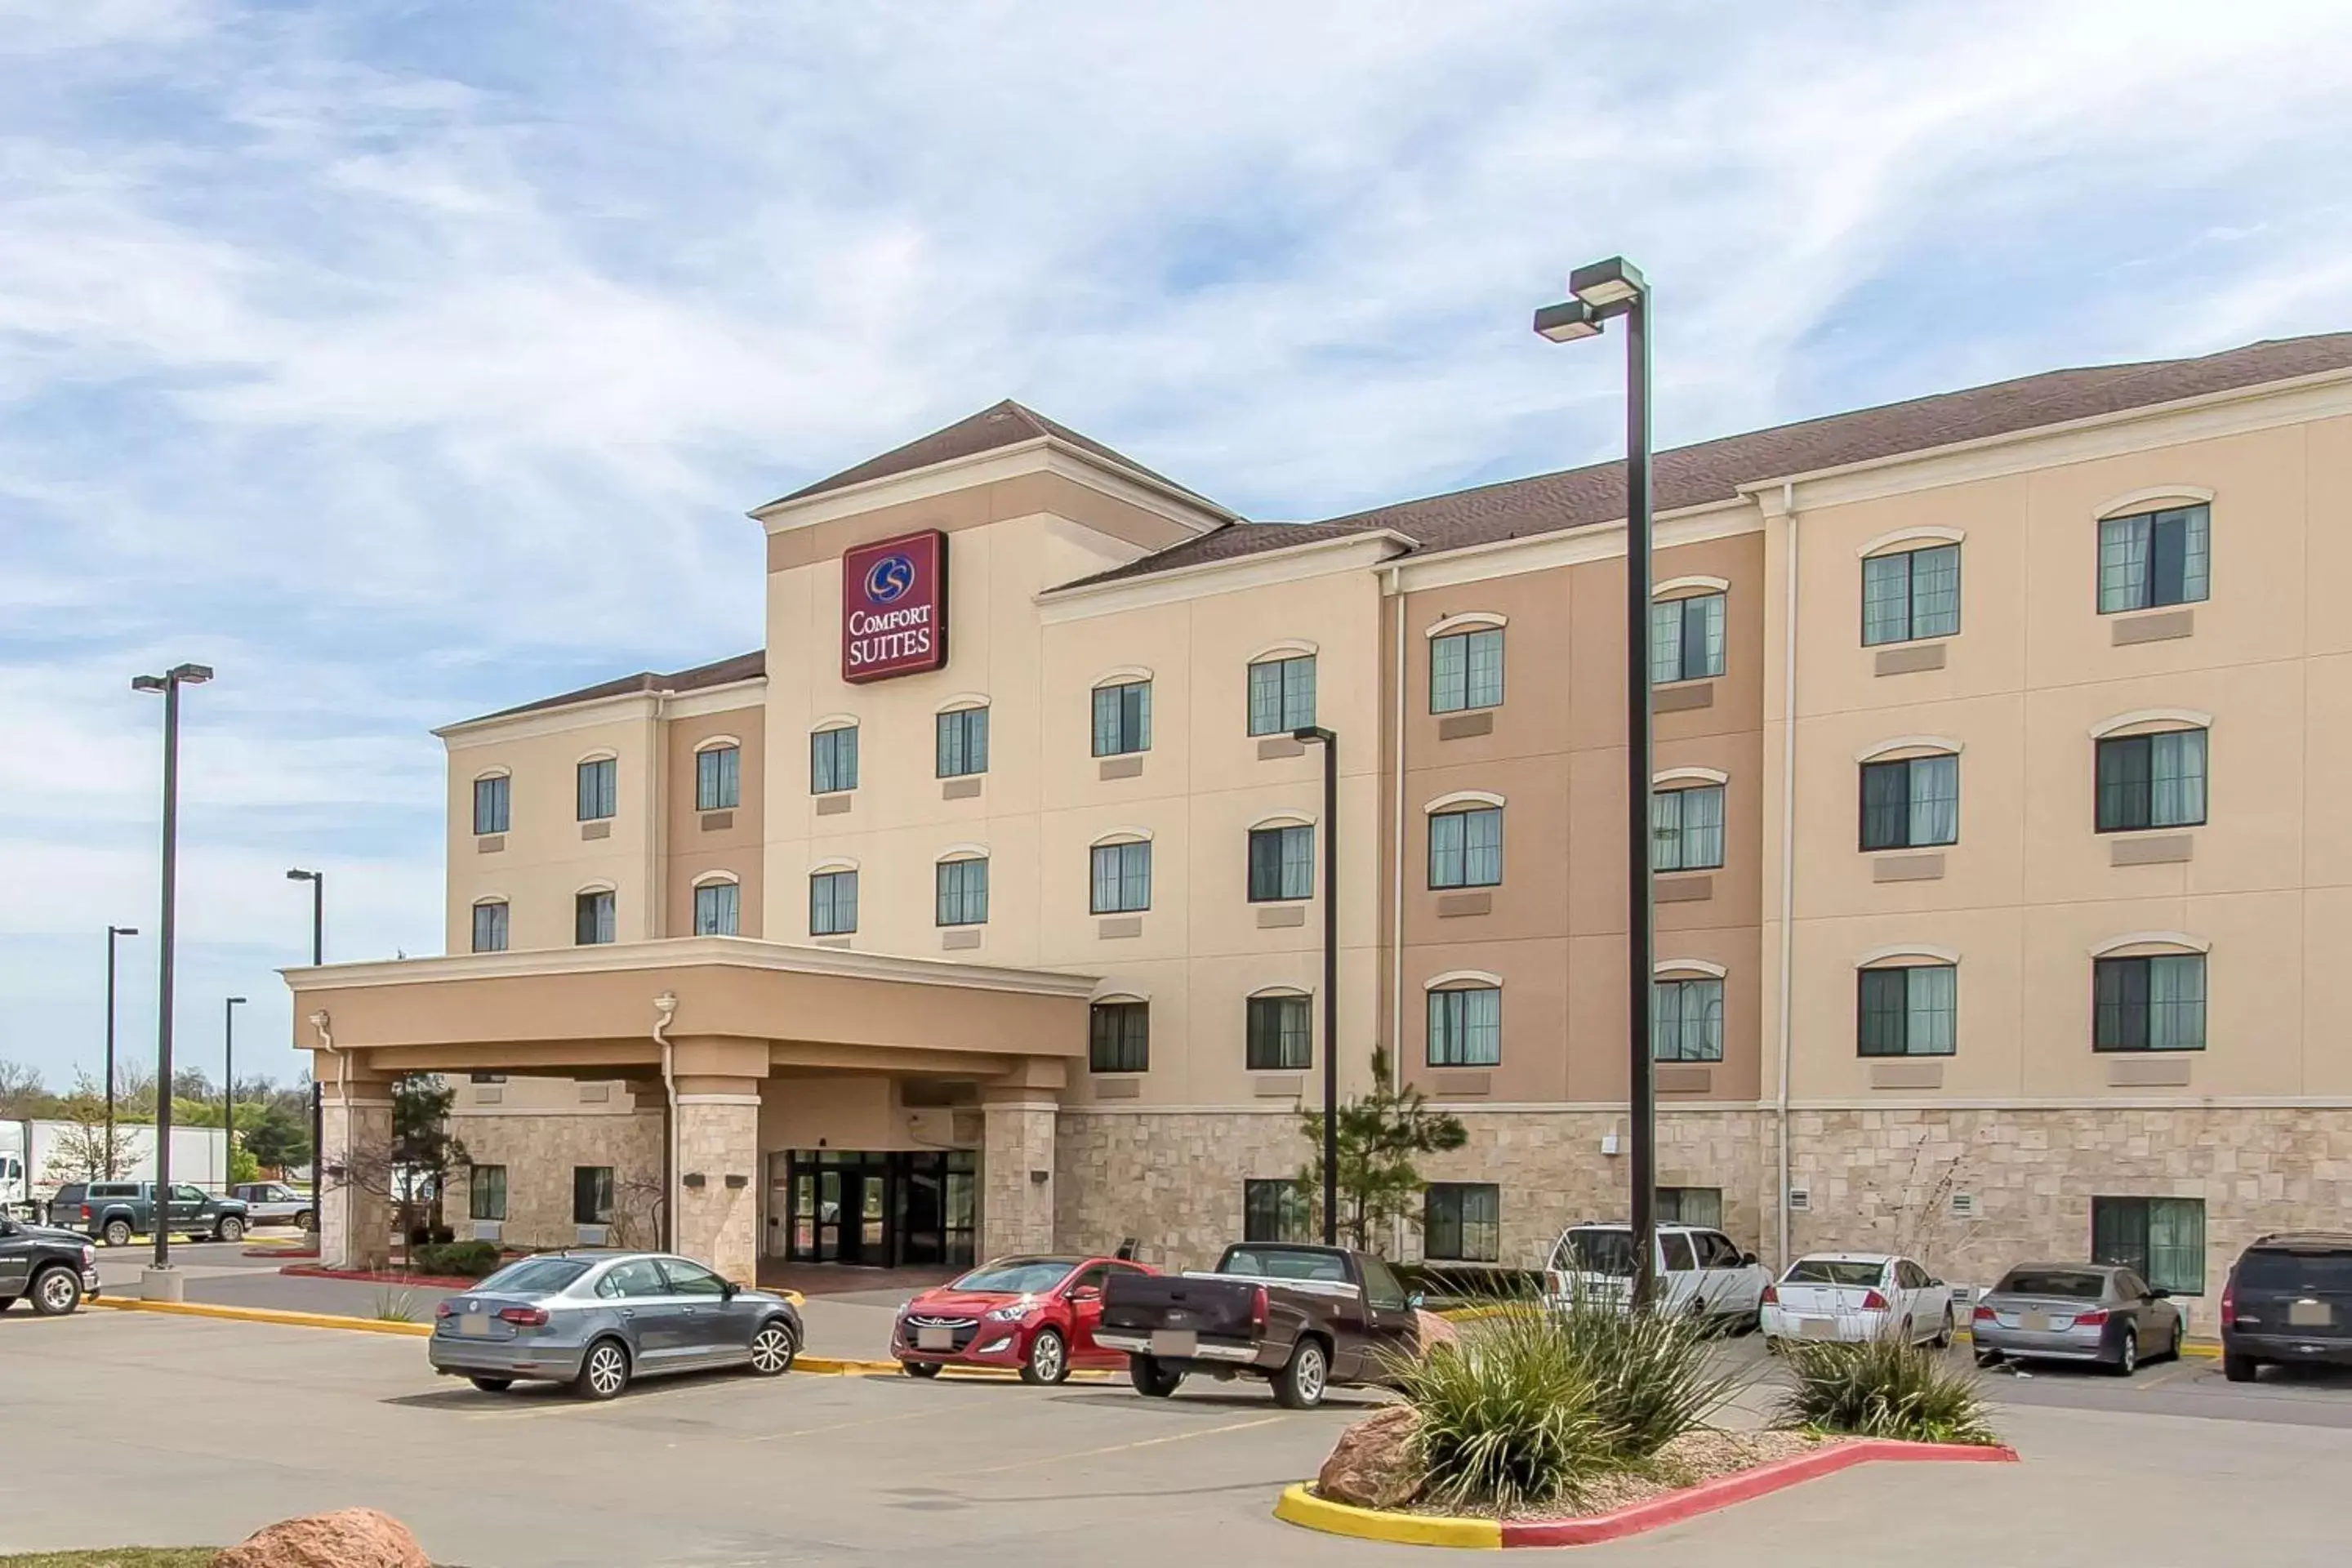 Property Building in Comfort Suites Lawton Near Fort Sill